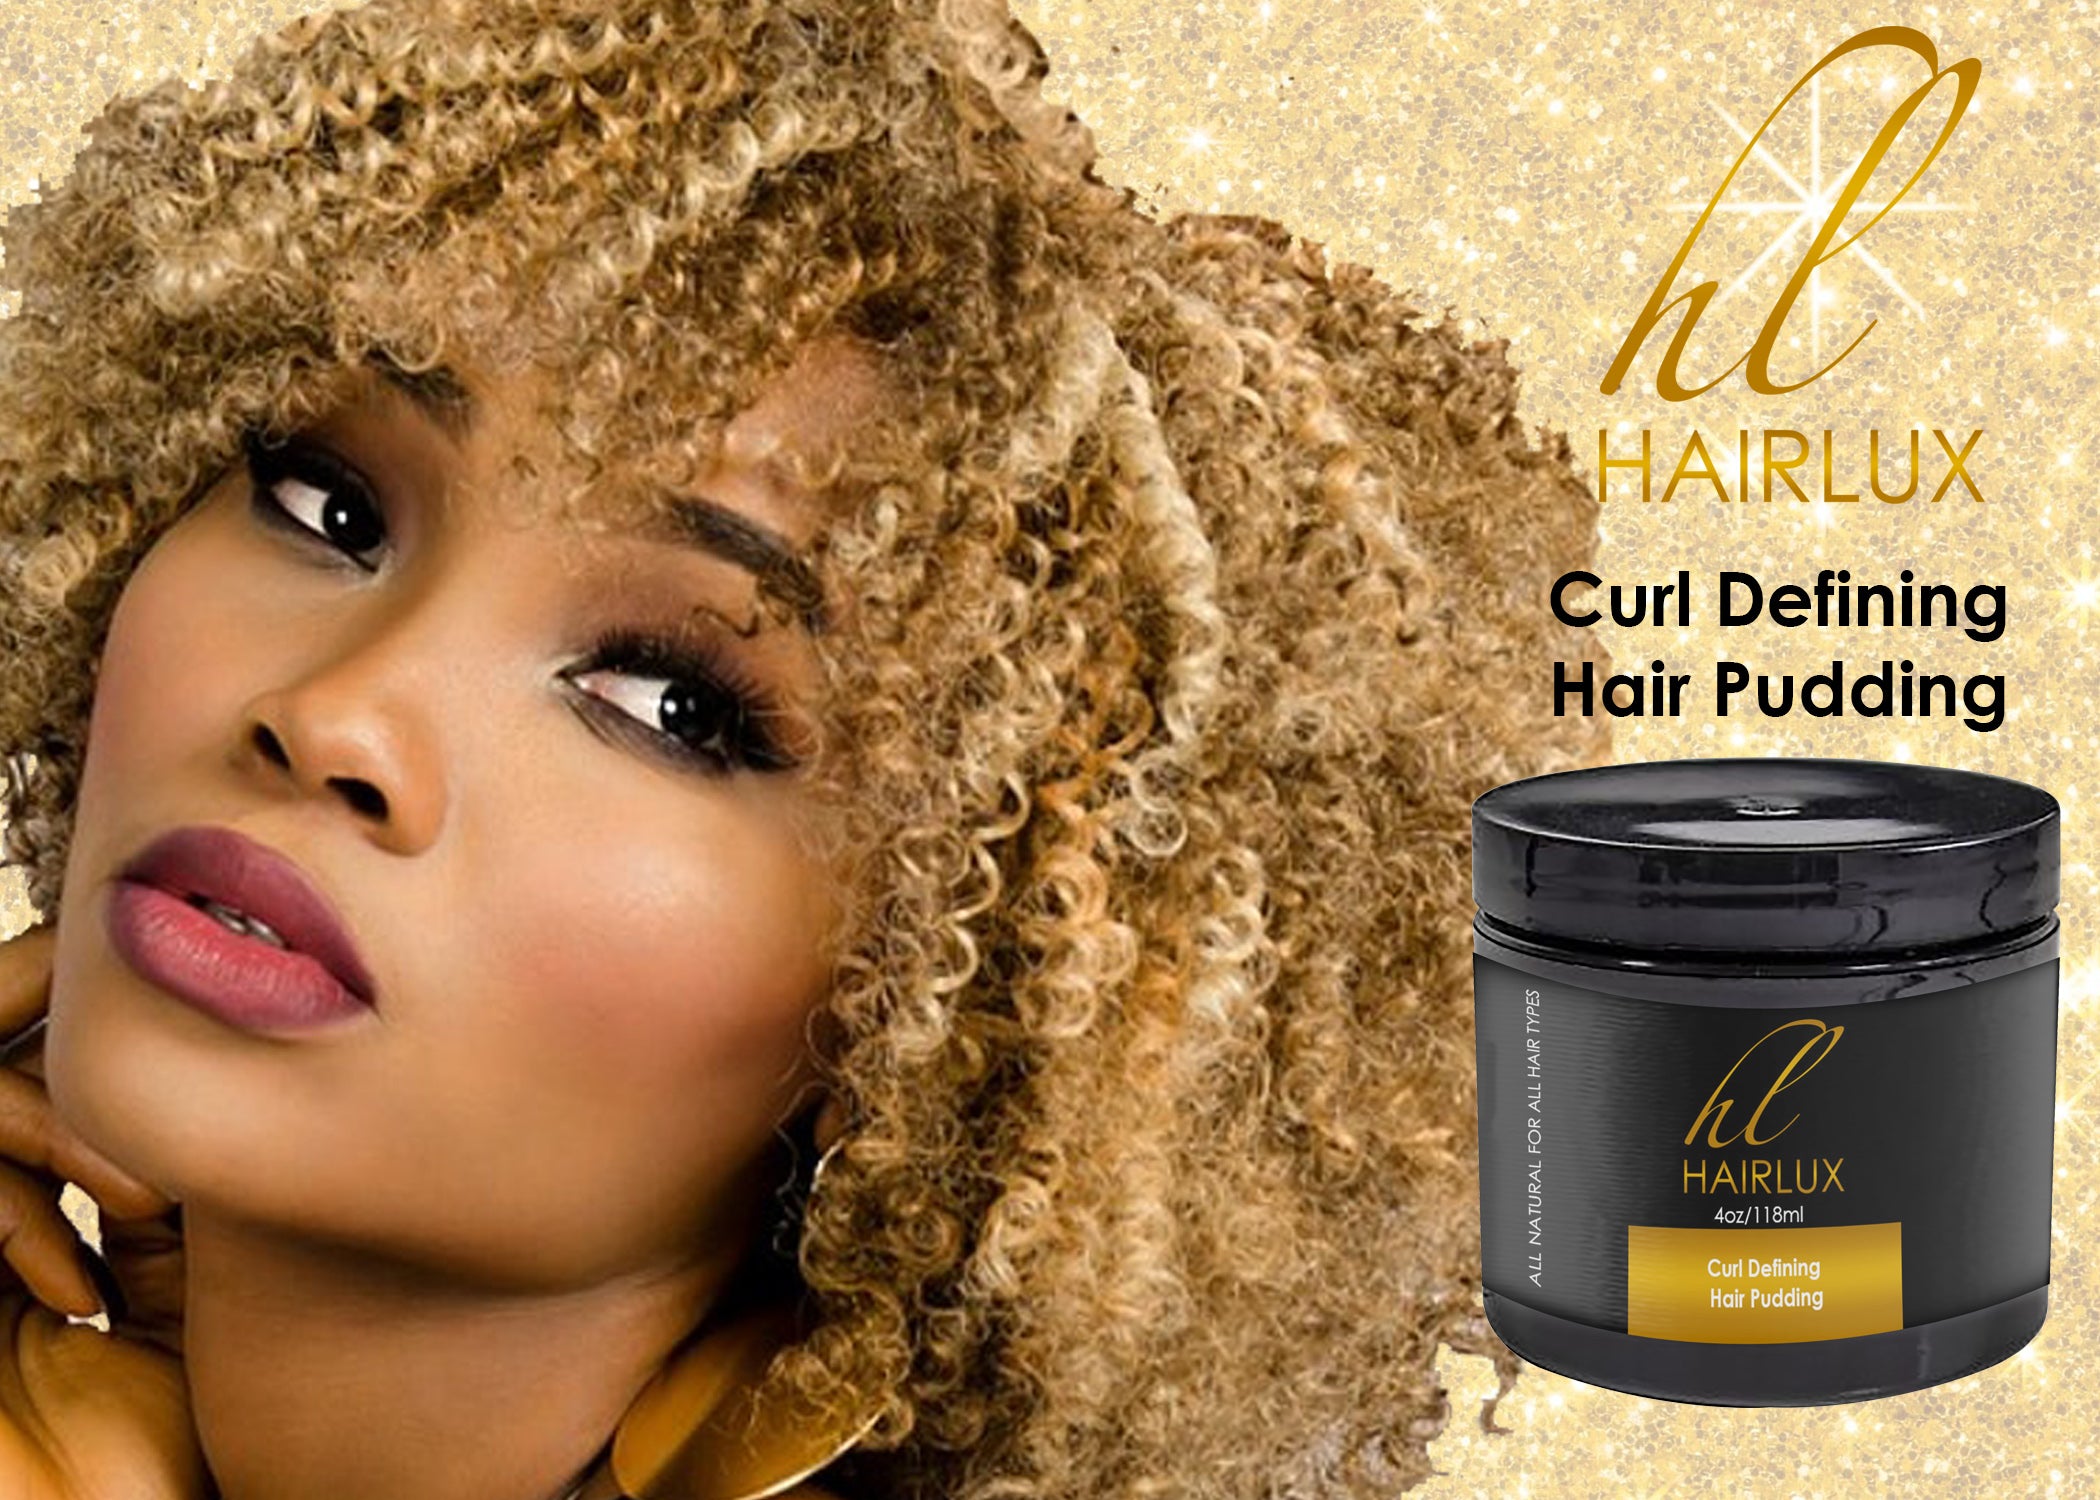 Curl Defining Hair Pudding